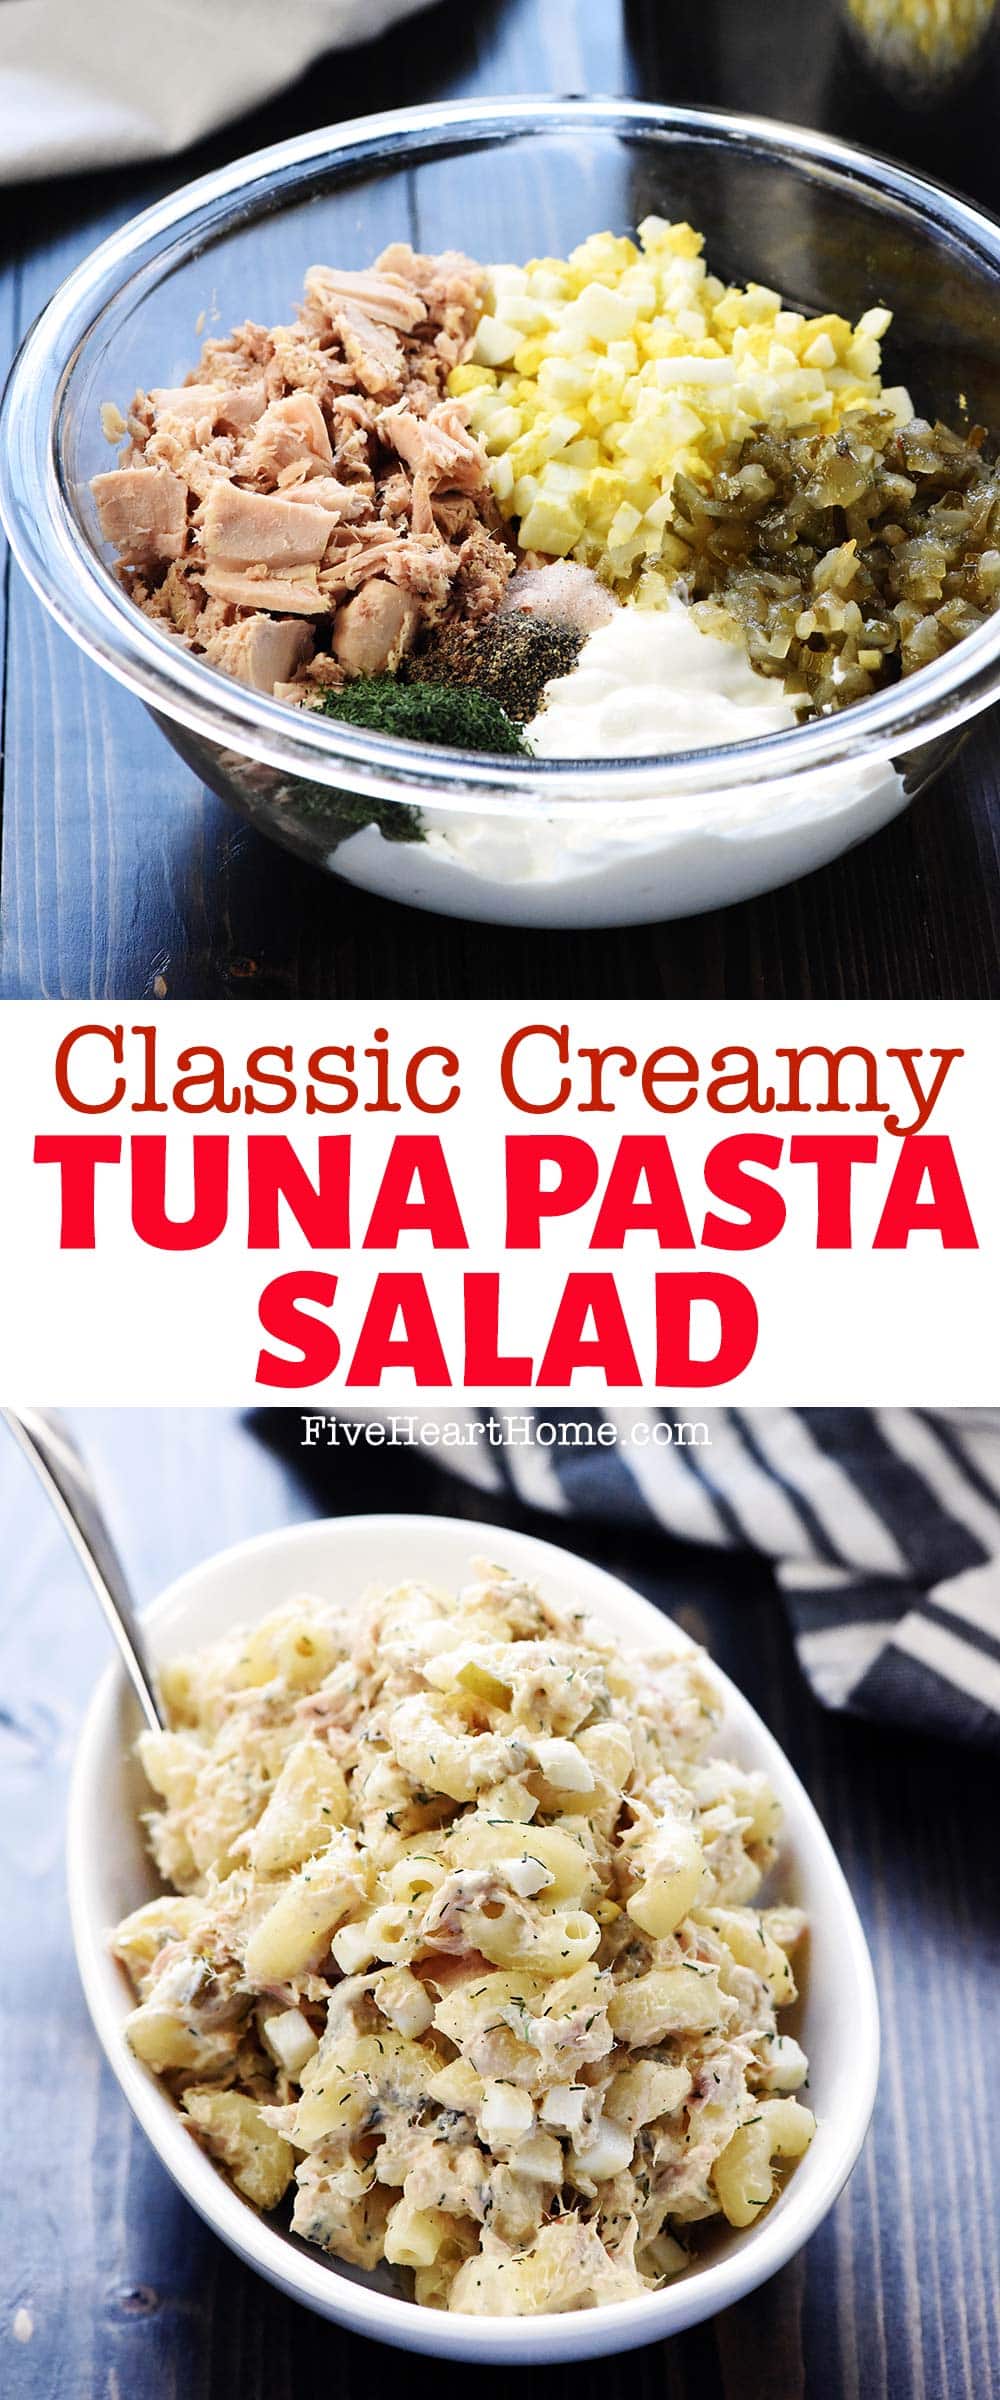 Tuna Pasta Salad features whole wheat macaroni, hard-boiled eggs, both sweet and dill pickles, and fresh dill in a lightened-up dressing of mayonnaise and Greek yogurt...this tuna macaroni salad is the BEST! | FiveHeartHome.com via @fivehearthome